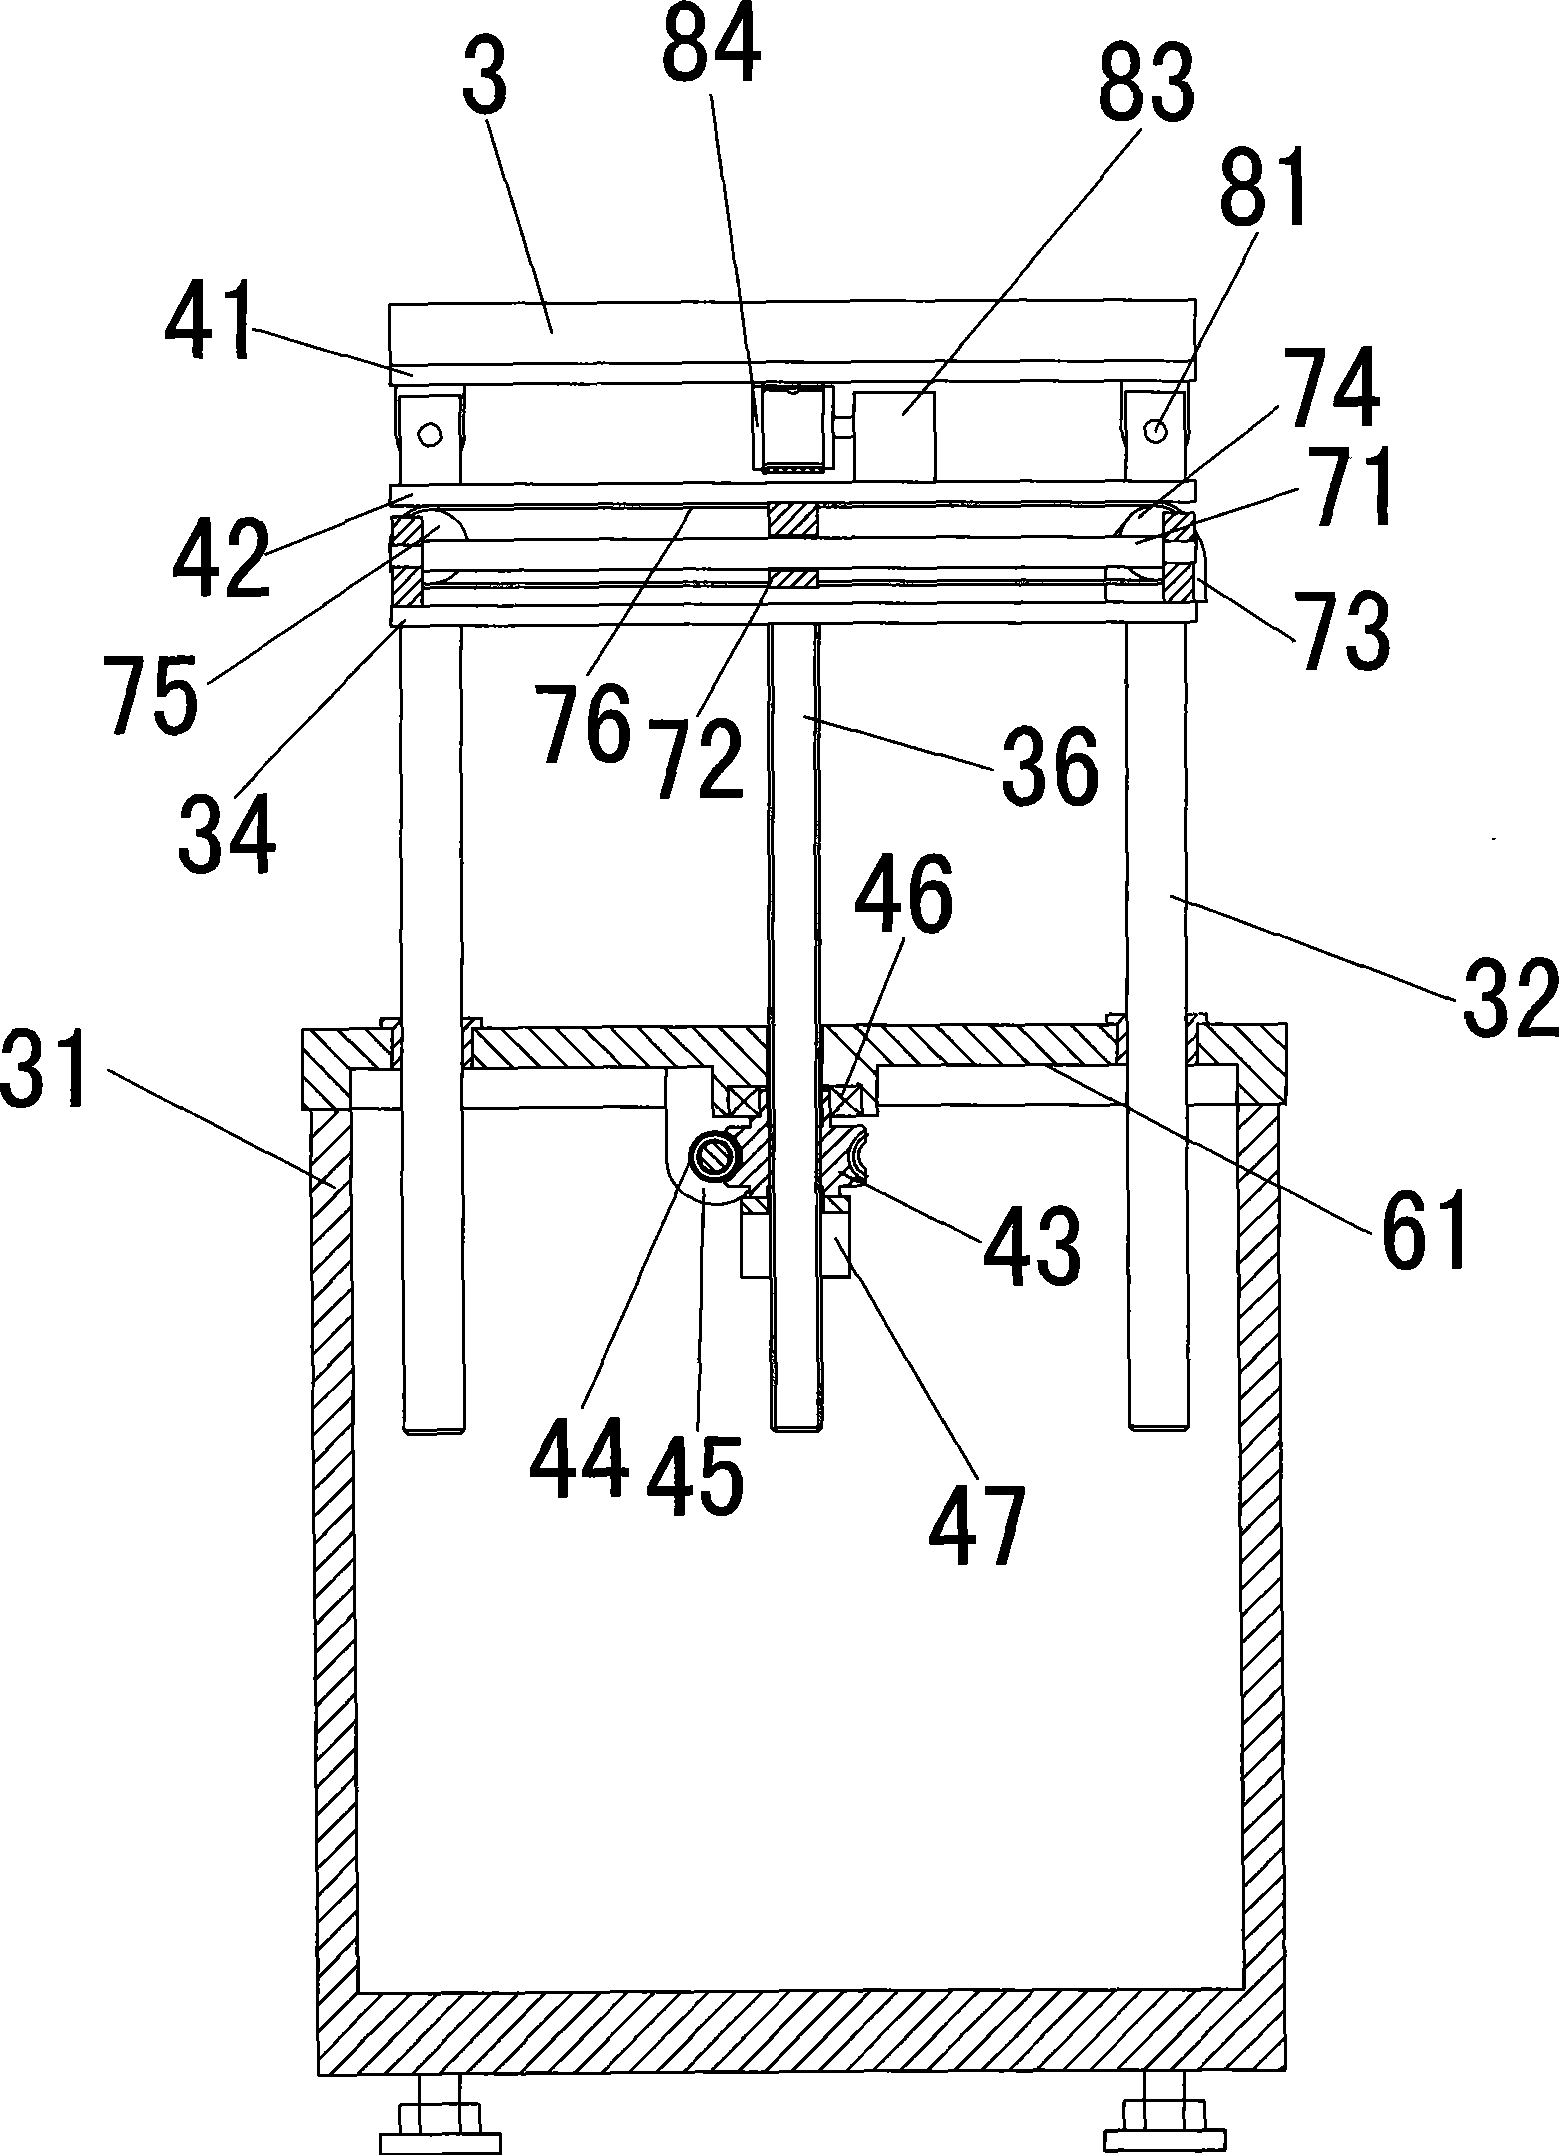 Laser instrument and method for sorting male and female graines